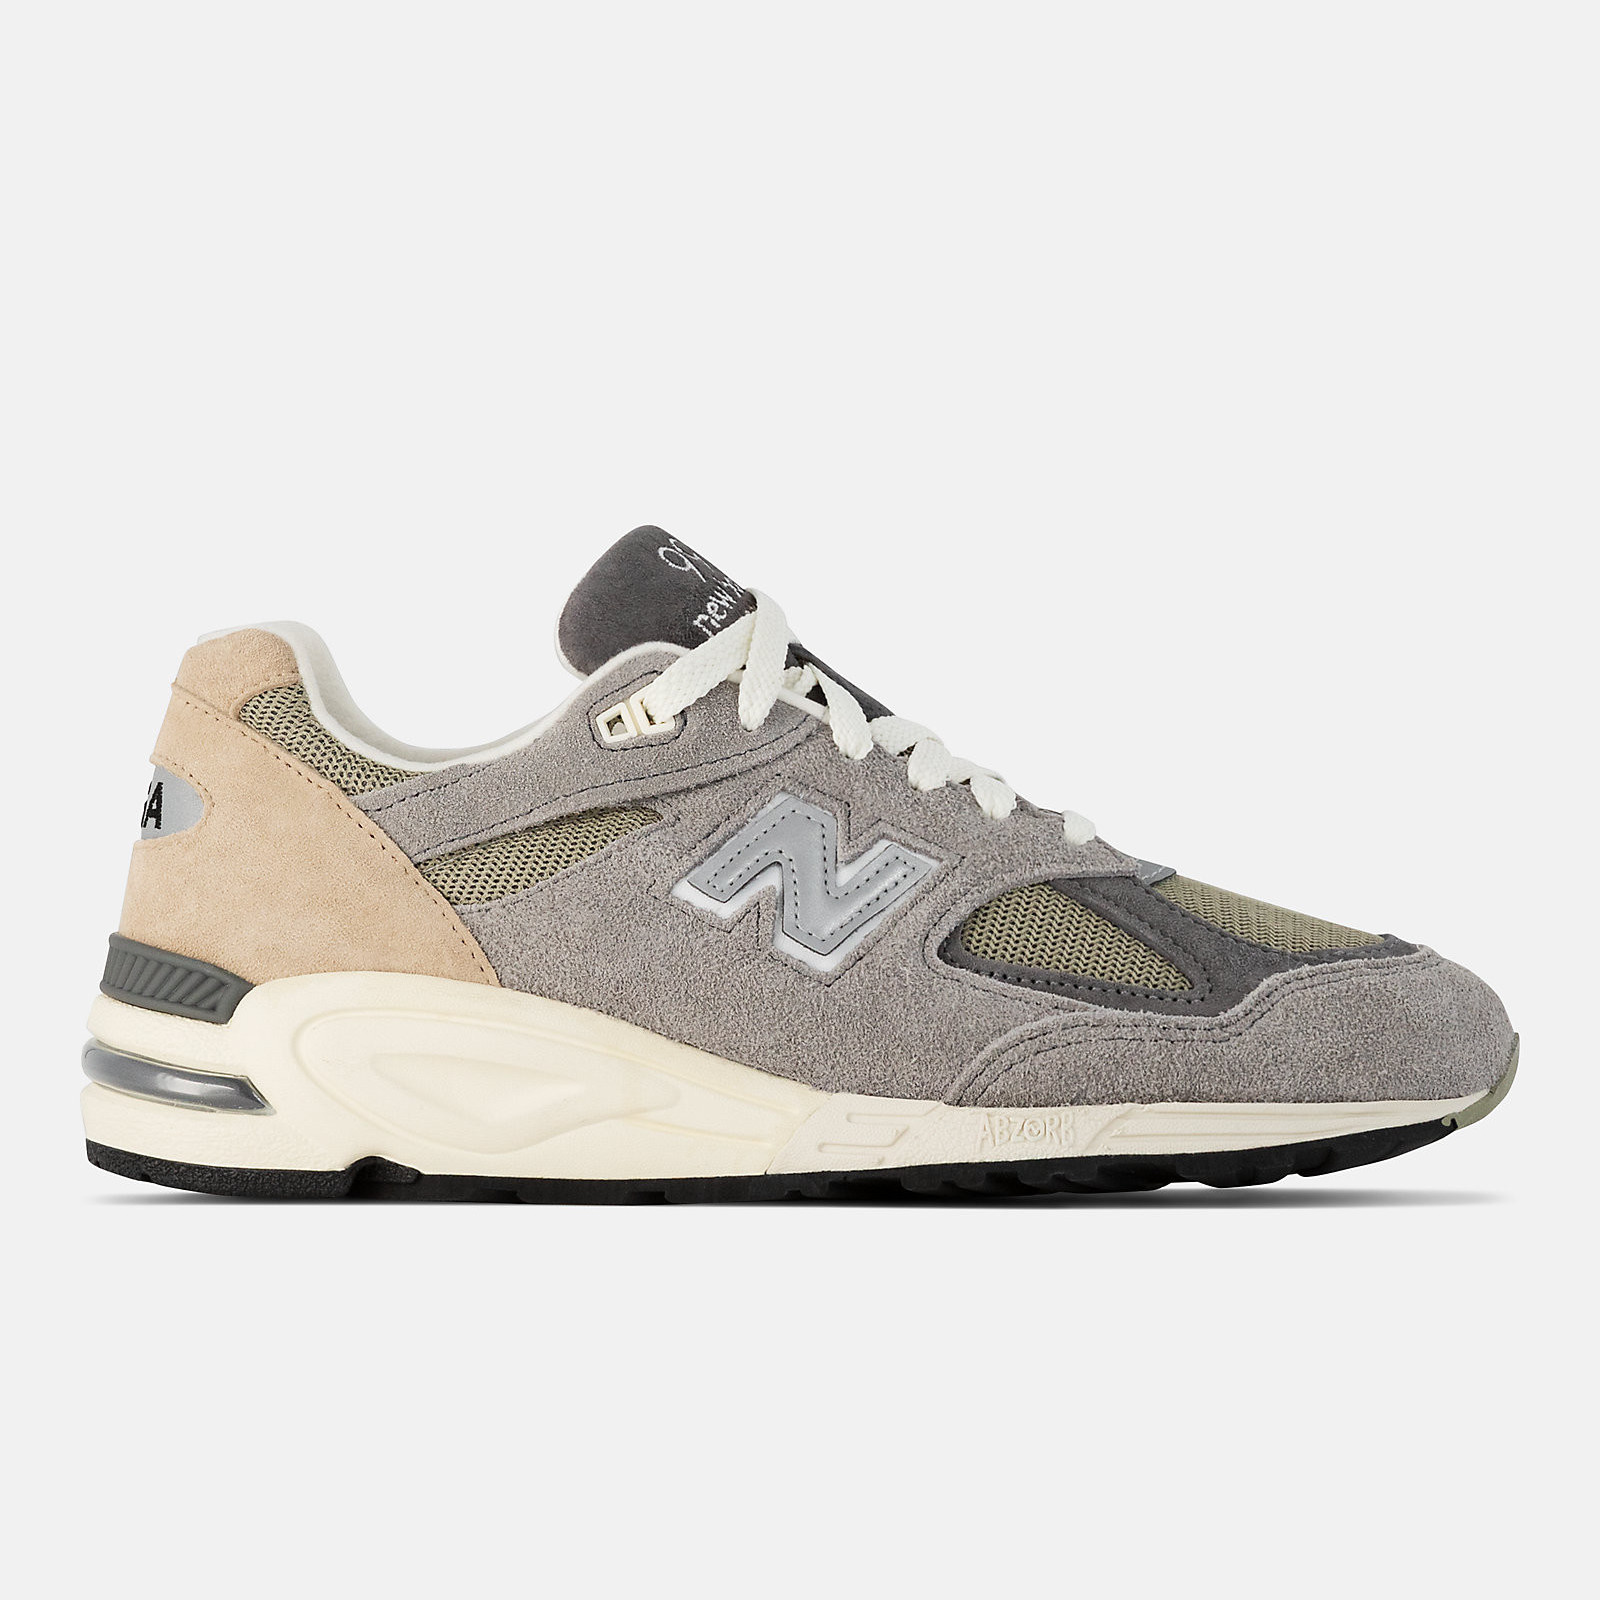 New Balance 990v2
Made In USA
« Marblehead »